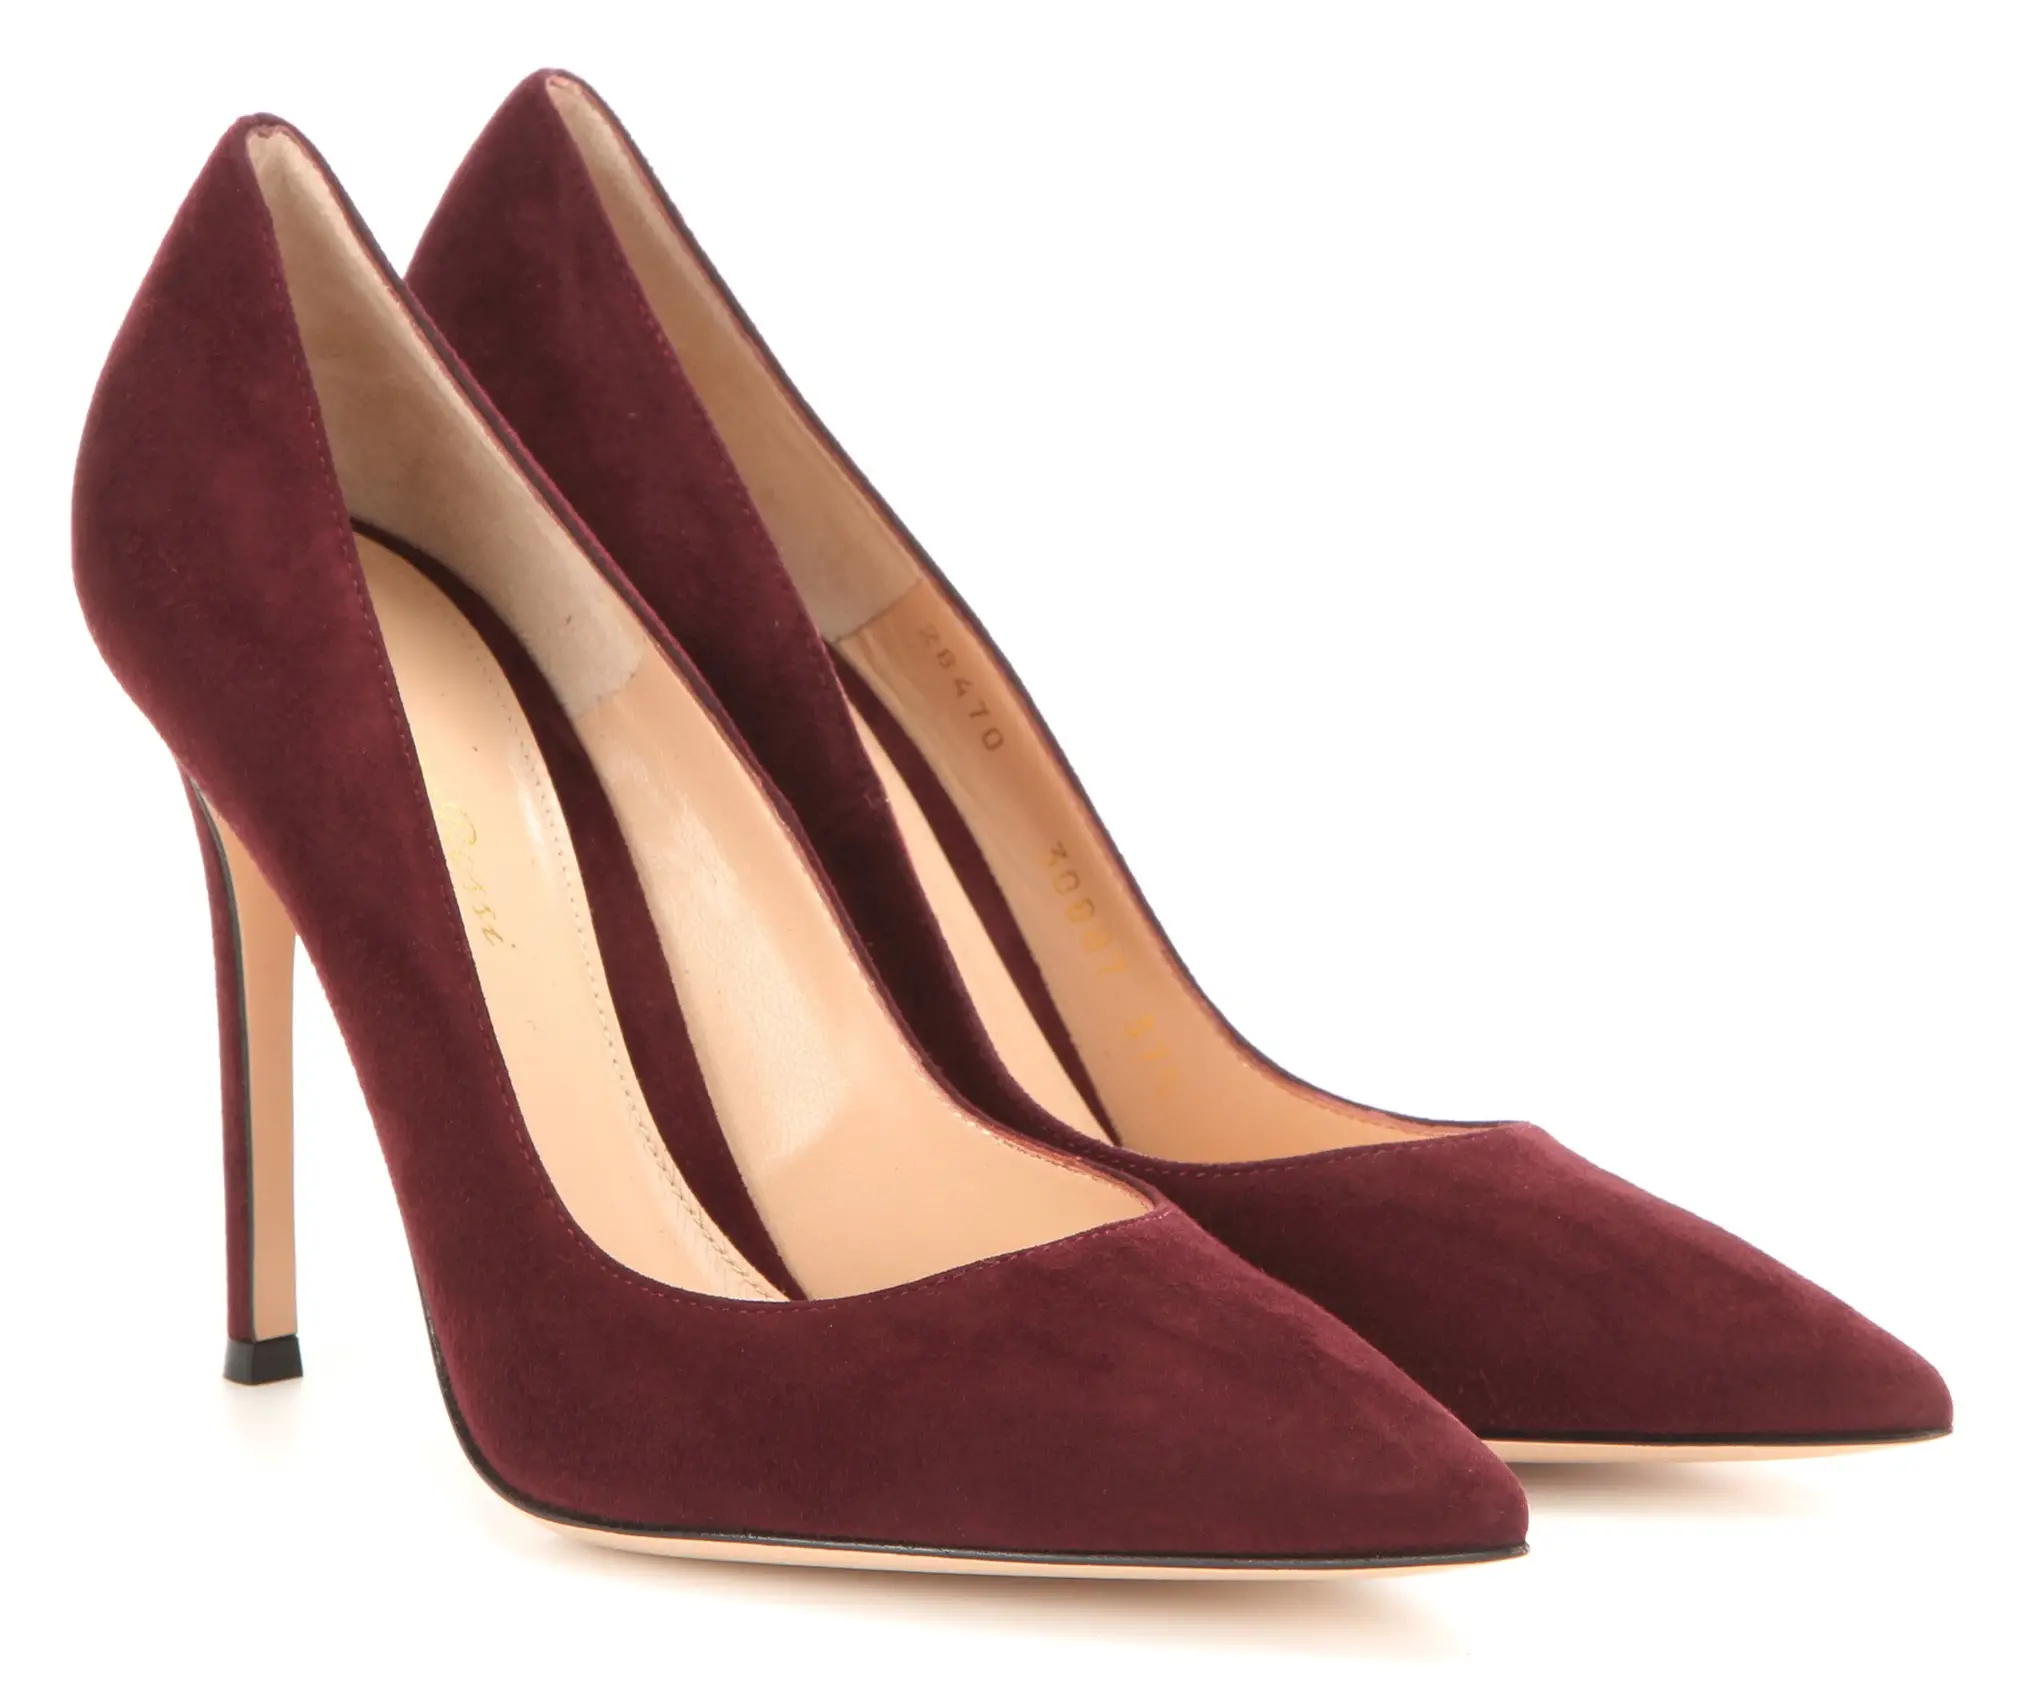 The Duchess of Cambridge was wearing Gianvito Rossi burgundy suede pumps